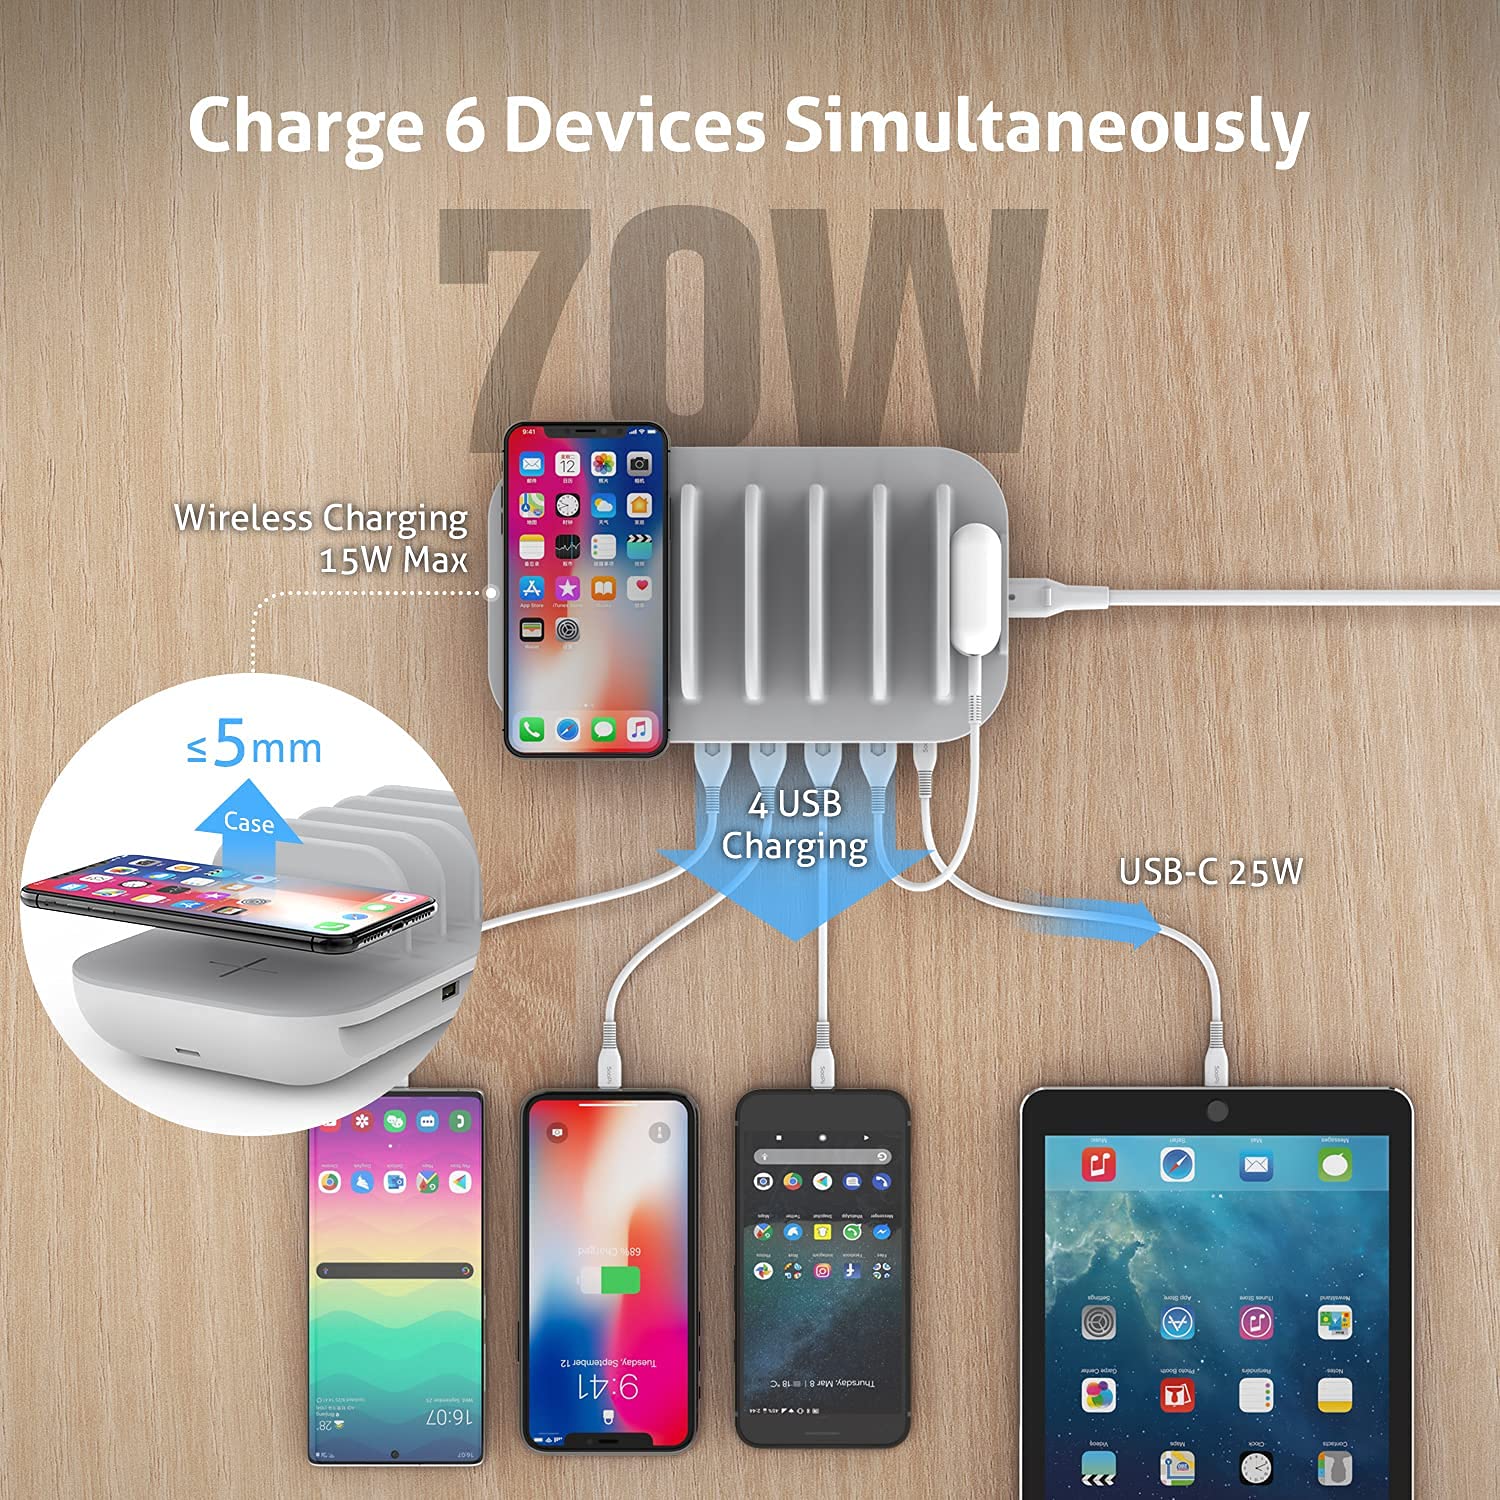 SooPii 70W Charging Station for Multiple Devices,5 Port Charging Dock with 15W Wireless Charger, 25W USB C PD/PPS Fast Charging for lPad,lPhone 14/Xs/Max/13/Samsung